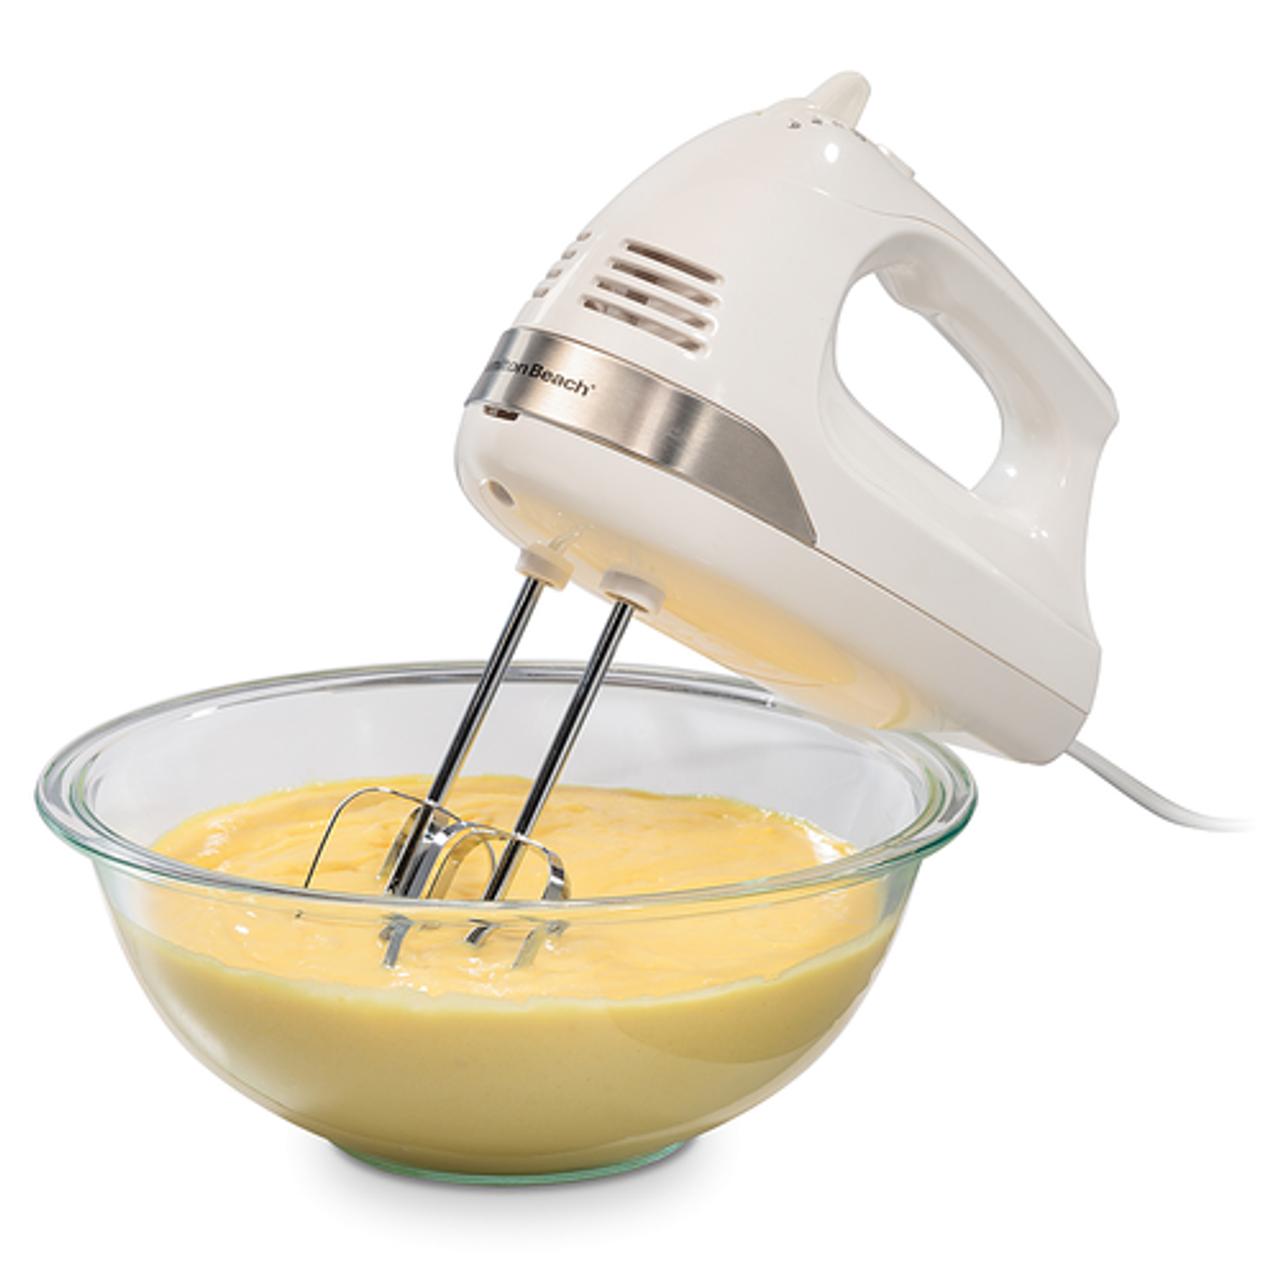 Hamilton Beach 6 Speed Hand Mixer with Easy Clean Beaters and Snap-On Case - WHITE